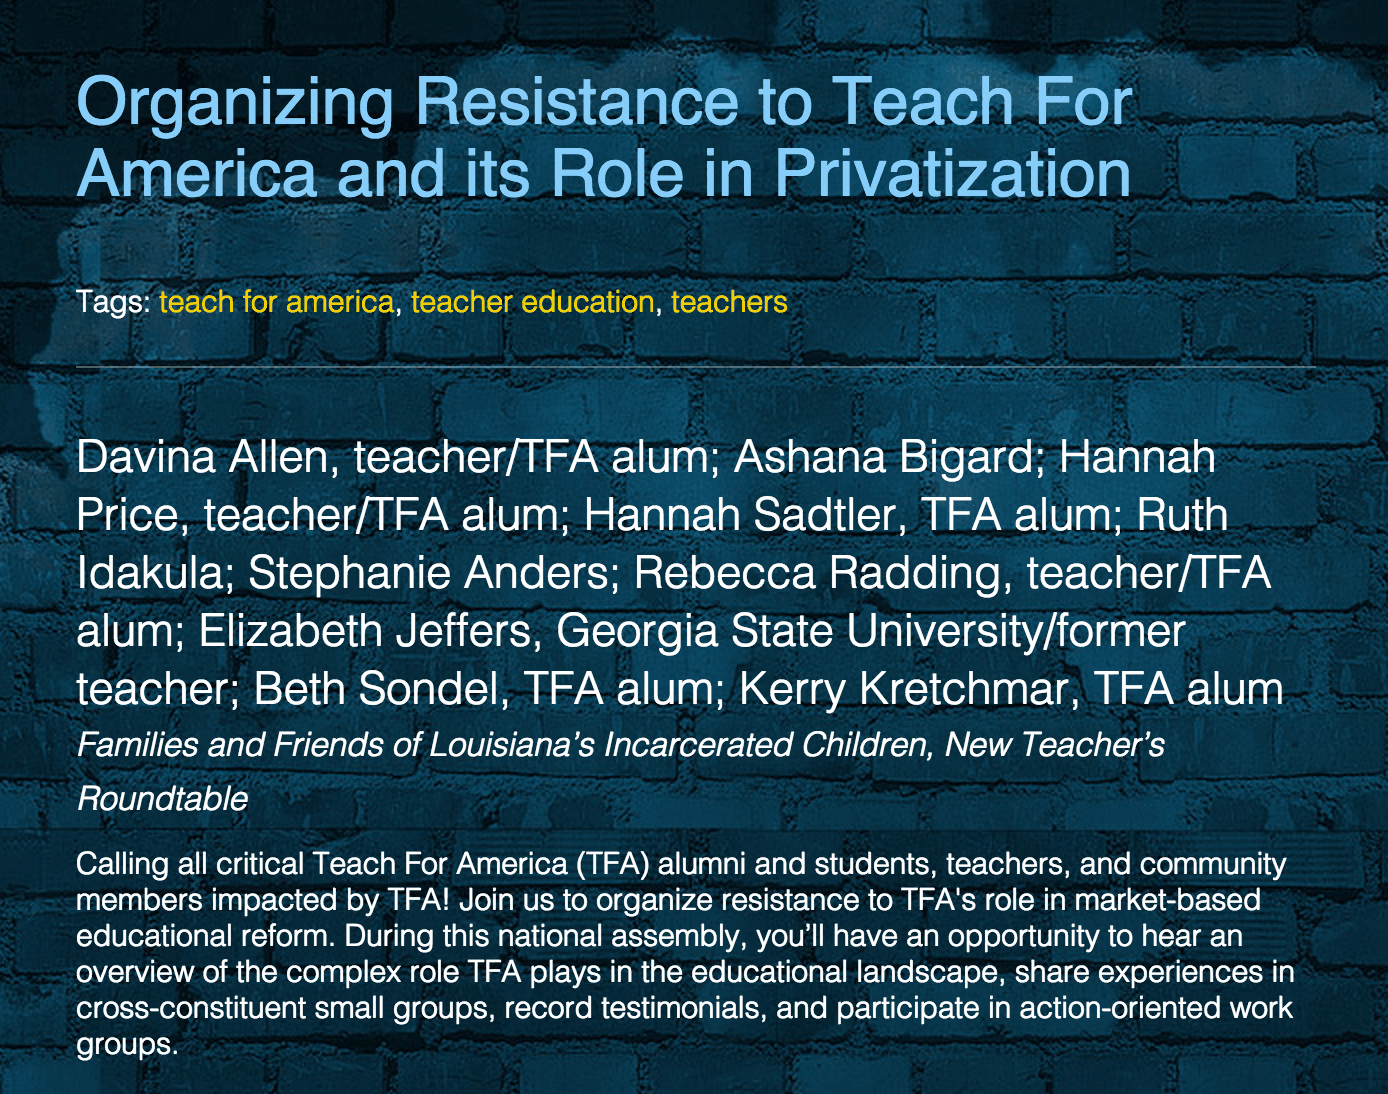 Davina Allen, who has been involved in anti-TFA organizing, is hardly representative of the city's Teach For America corps members and alumni.